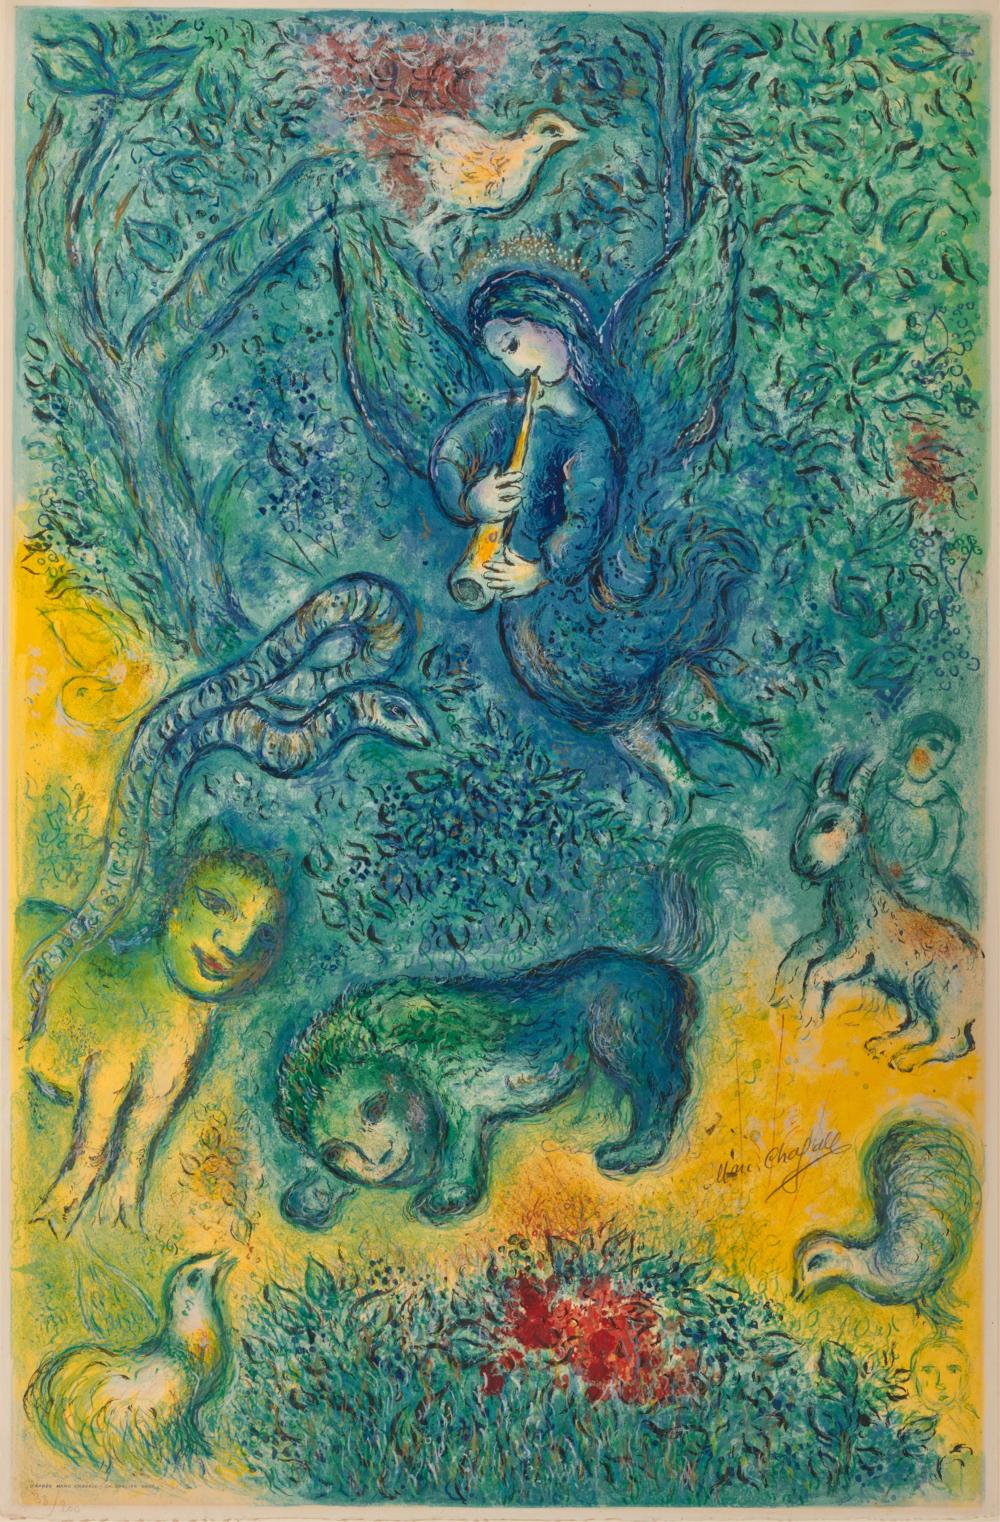 AFTER MARC CHAGALLAfter MARC CHAGALL,